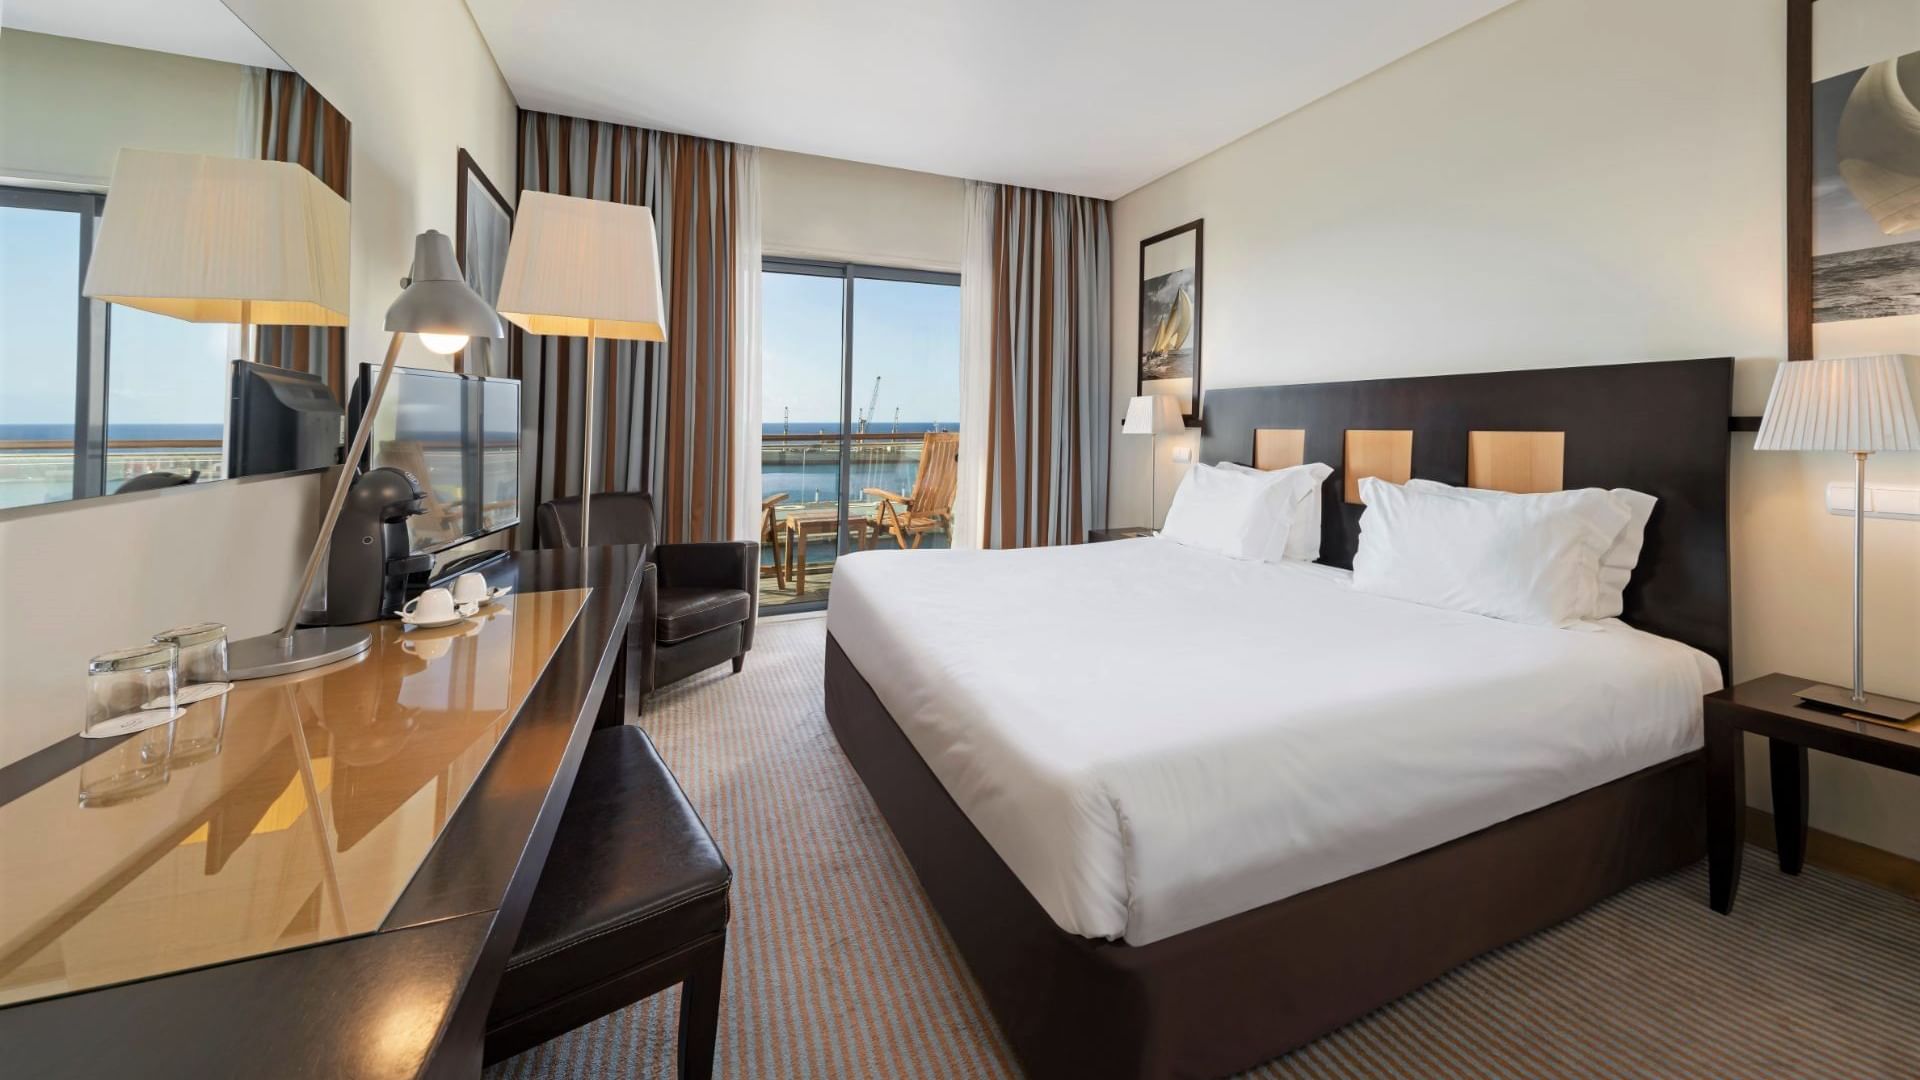 Large bed, work desk, lamps & balcony in Executive Ocean View Room at Hotel Marina Atlântico